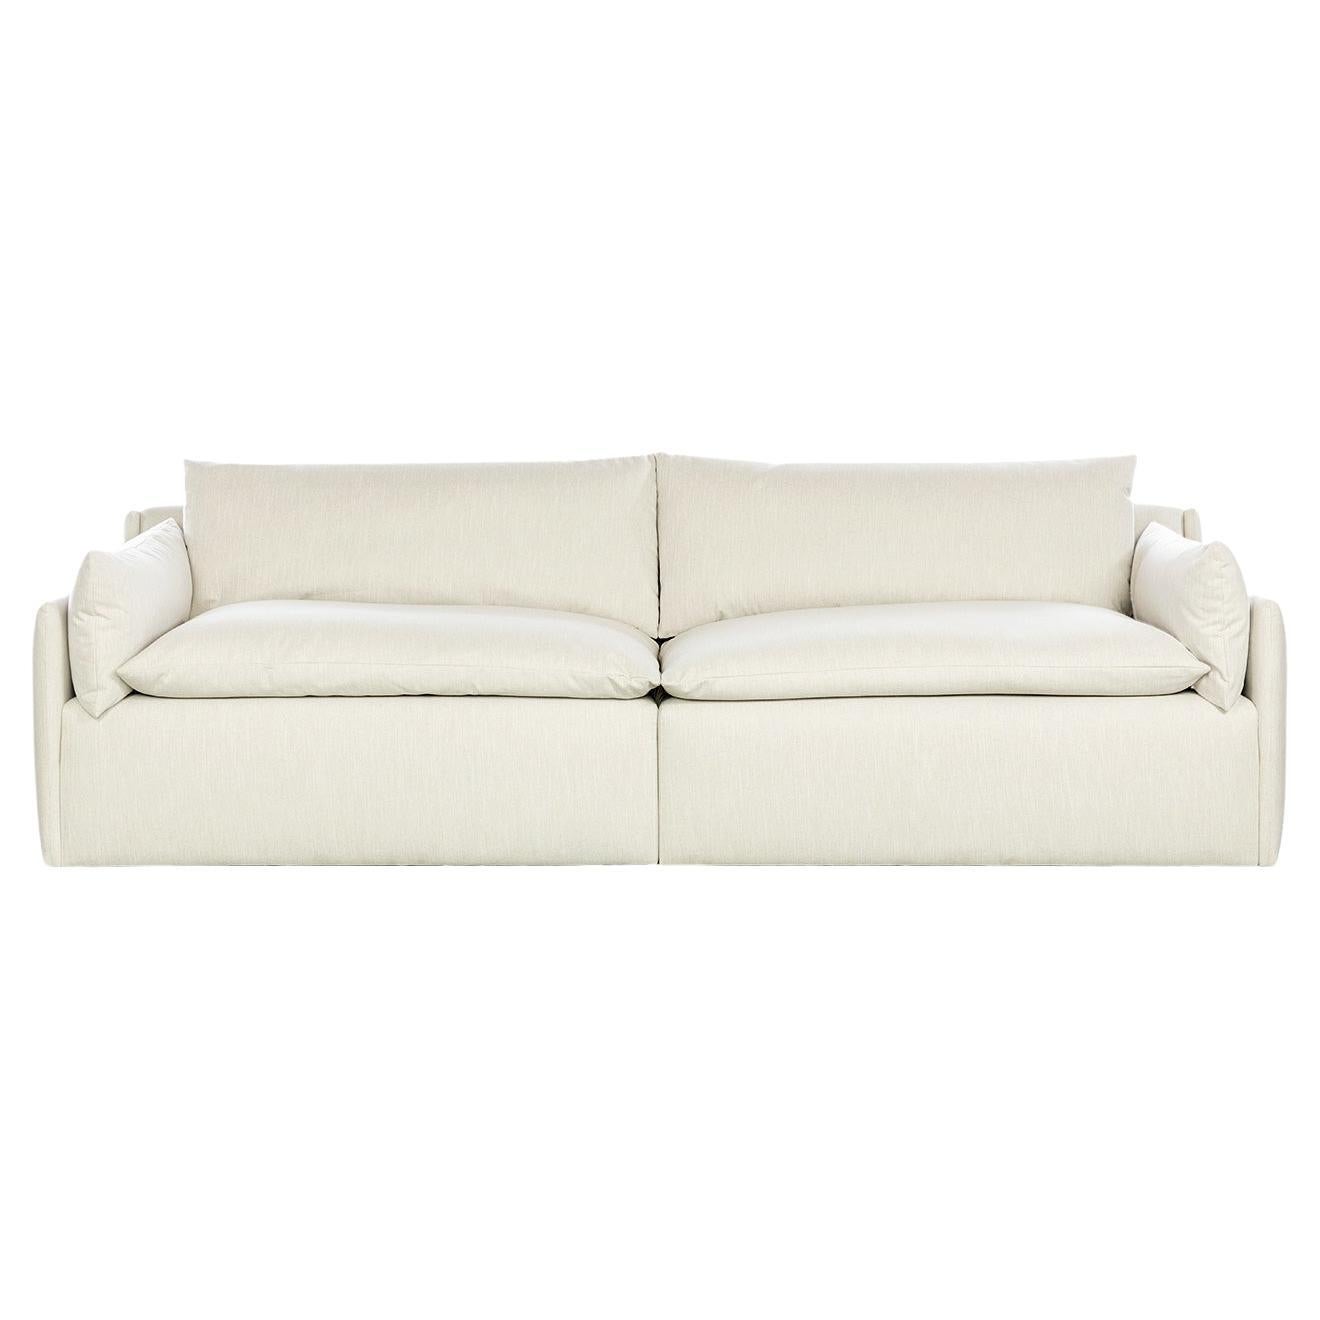 Saramony Sofa with Feather Seat and Back Cushions  For Sale